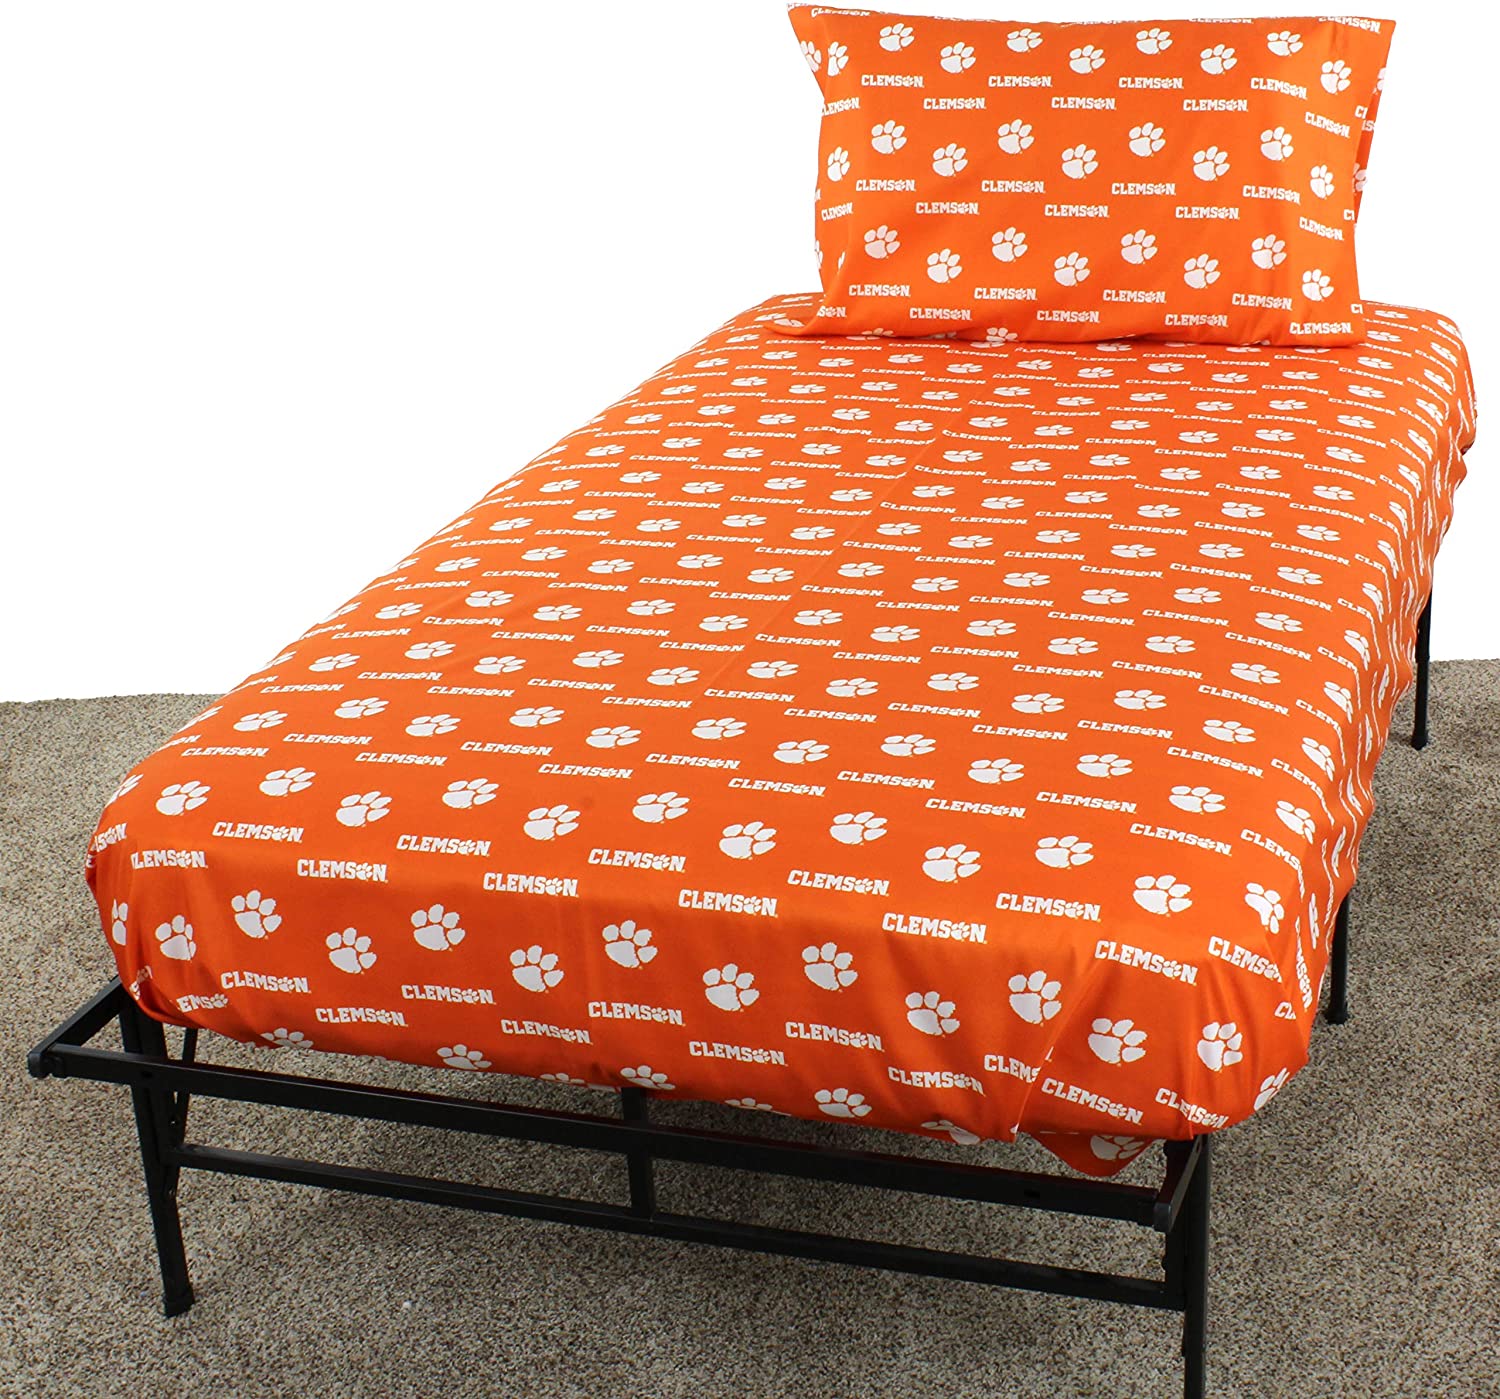 Clesstw Clemson Printed Sheet Set Twin- Solid